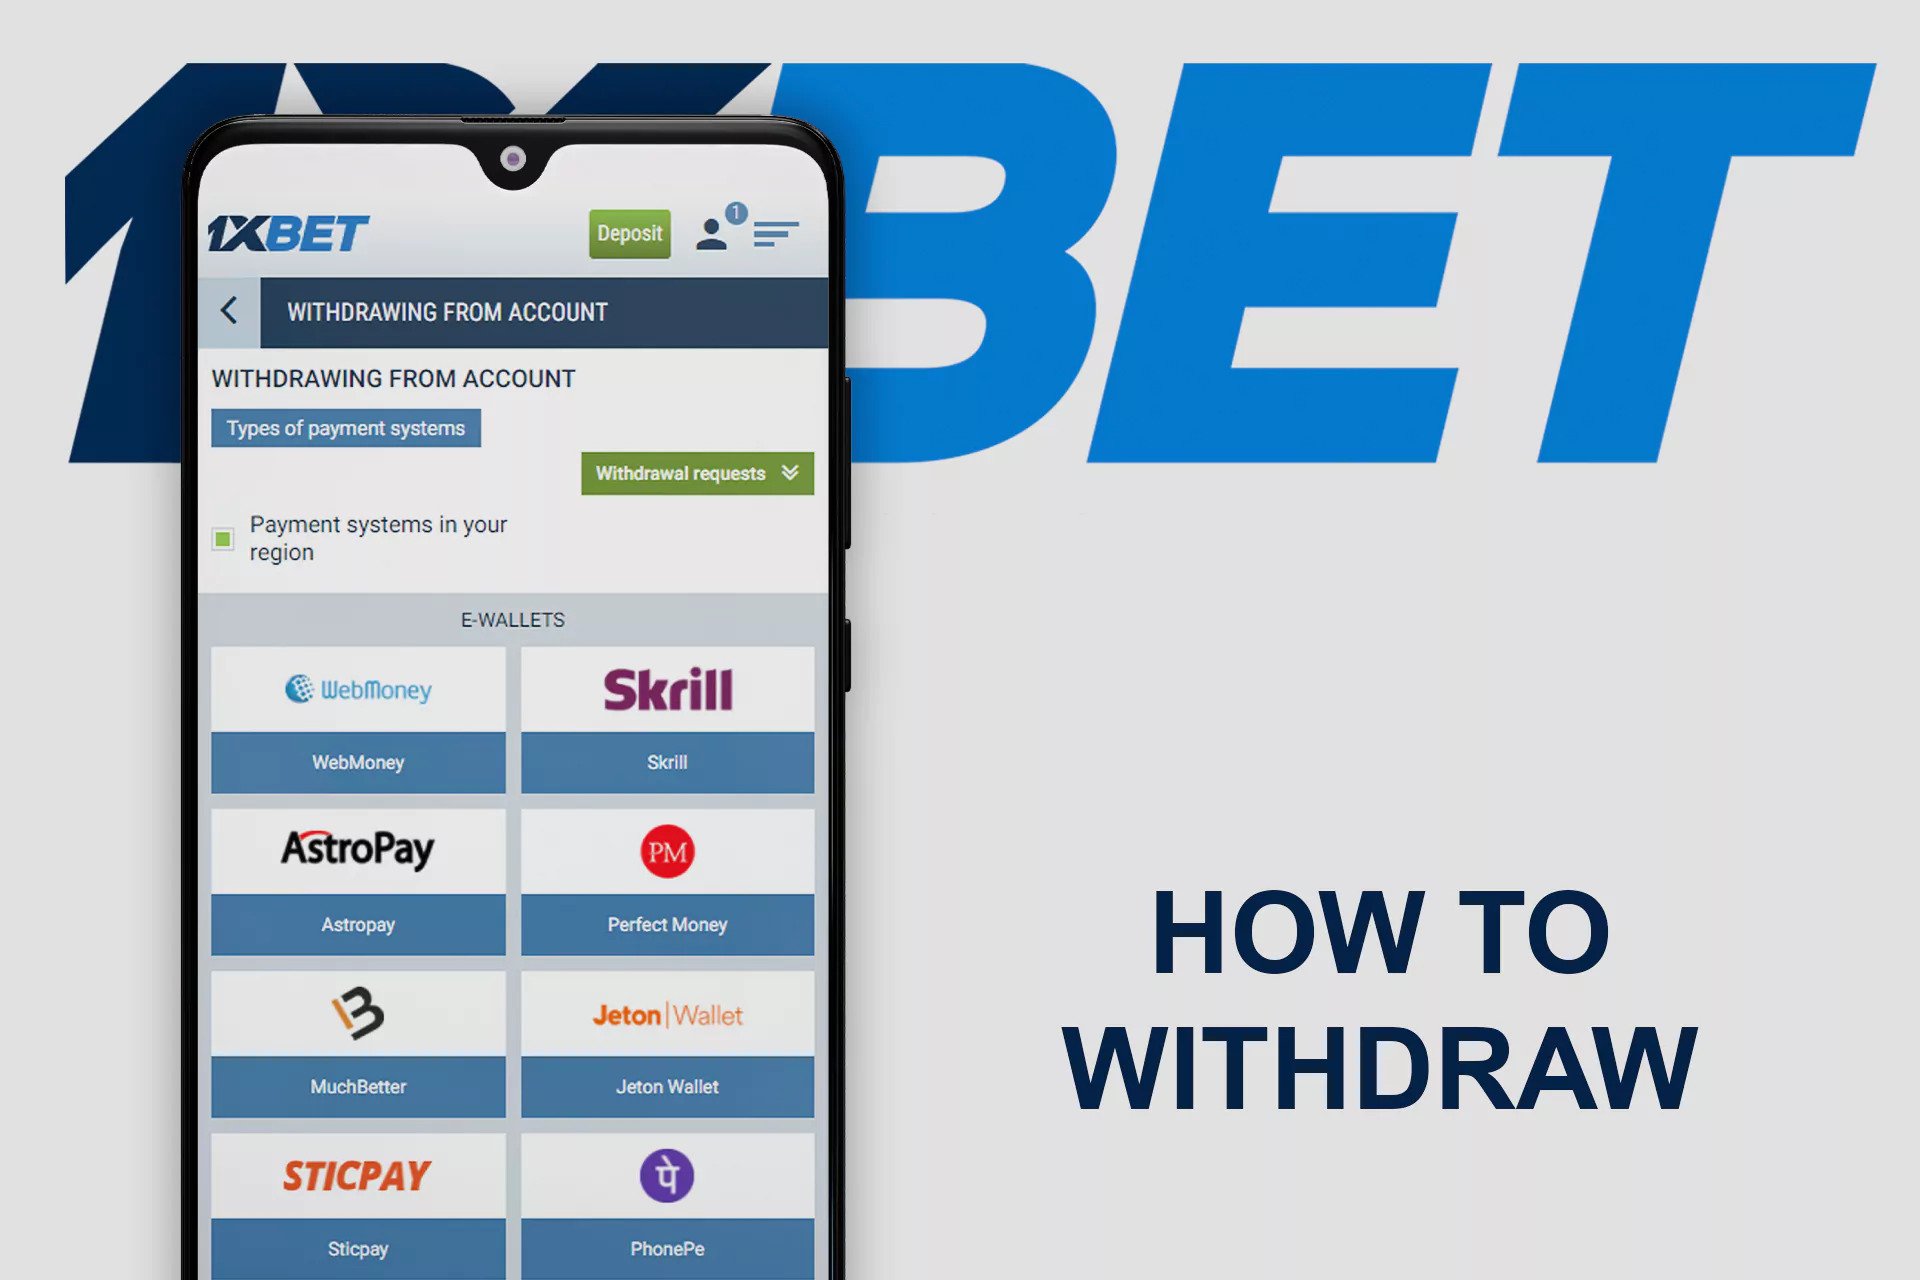 Depositing and withdrawing 1xbet